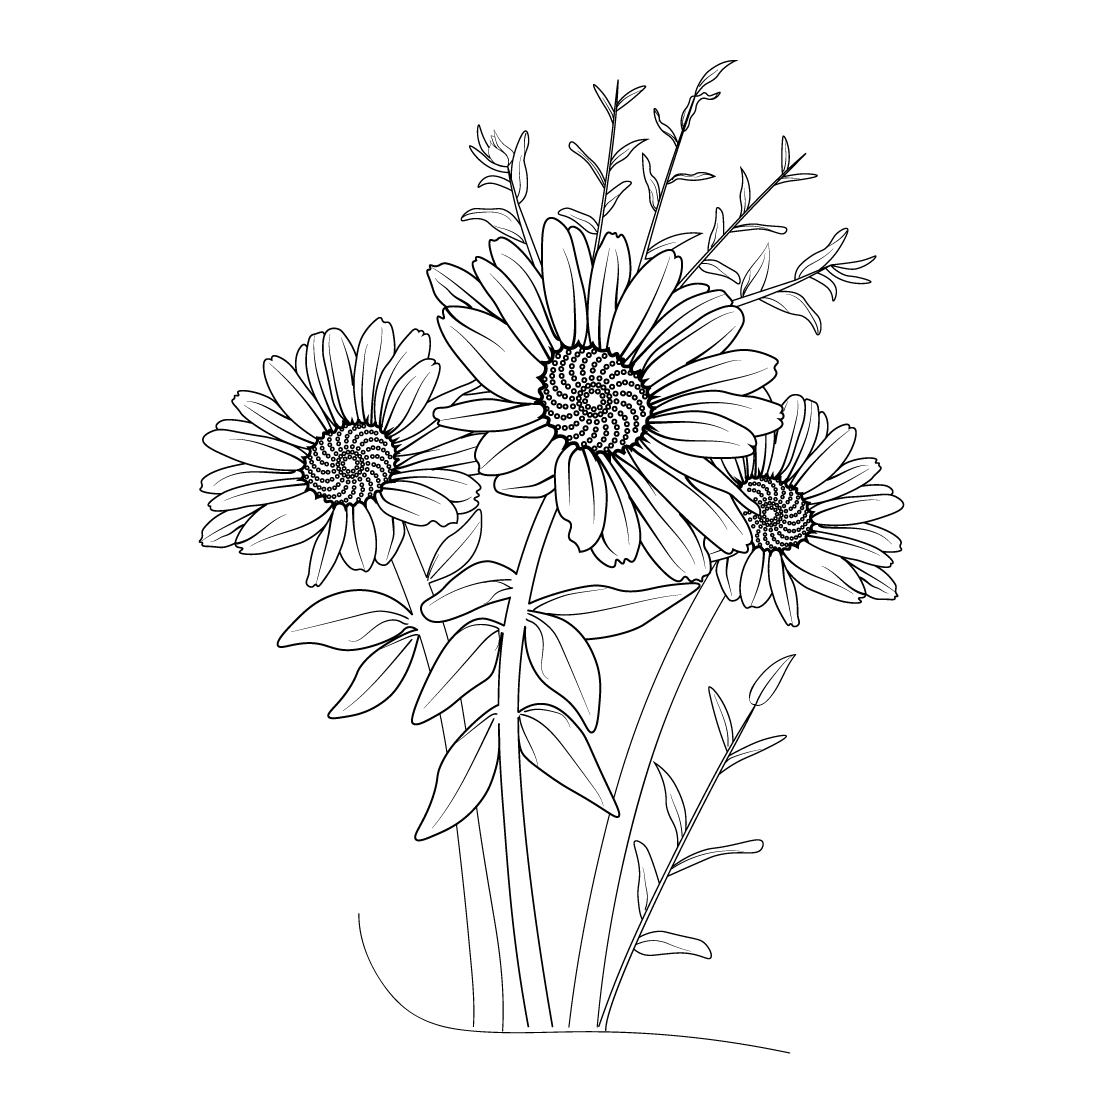 Pencil realistic daisy flower drawing. simple daisy line drawing, daisy ...